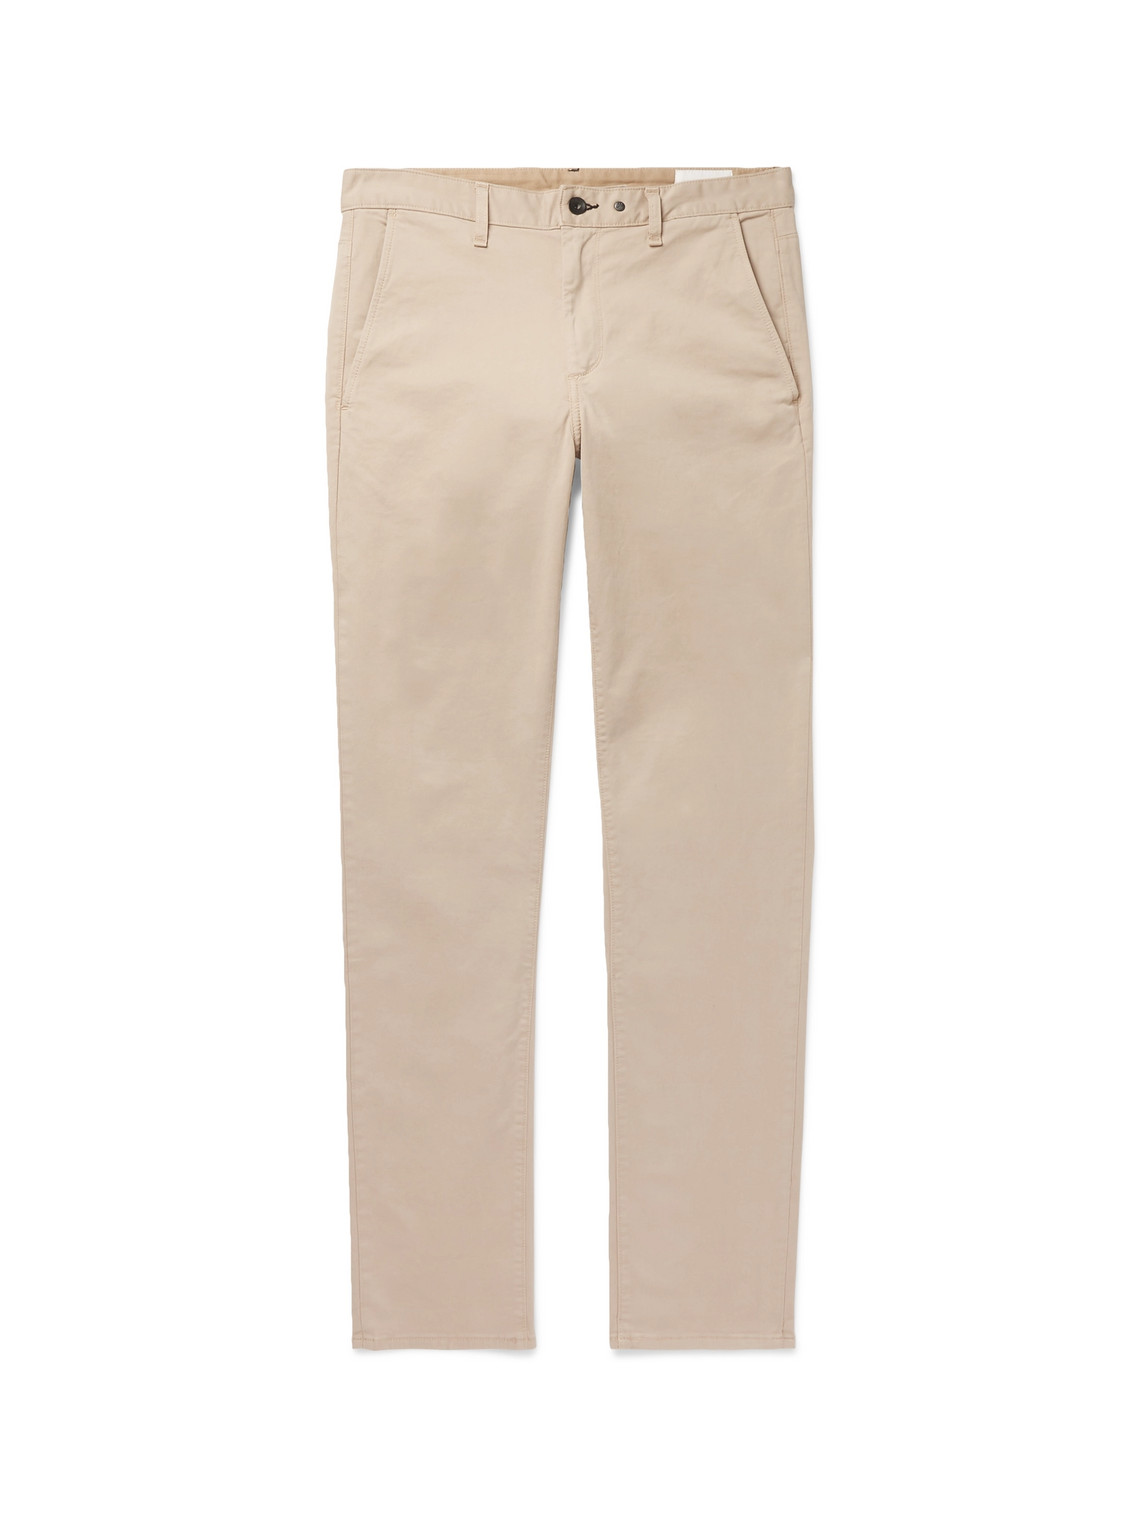 Fit 2 Slim-Fit Garment-Dyed Cotton-Blend Twill Chinos